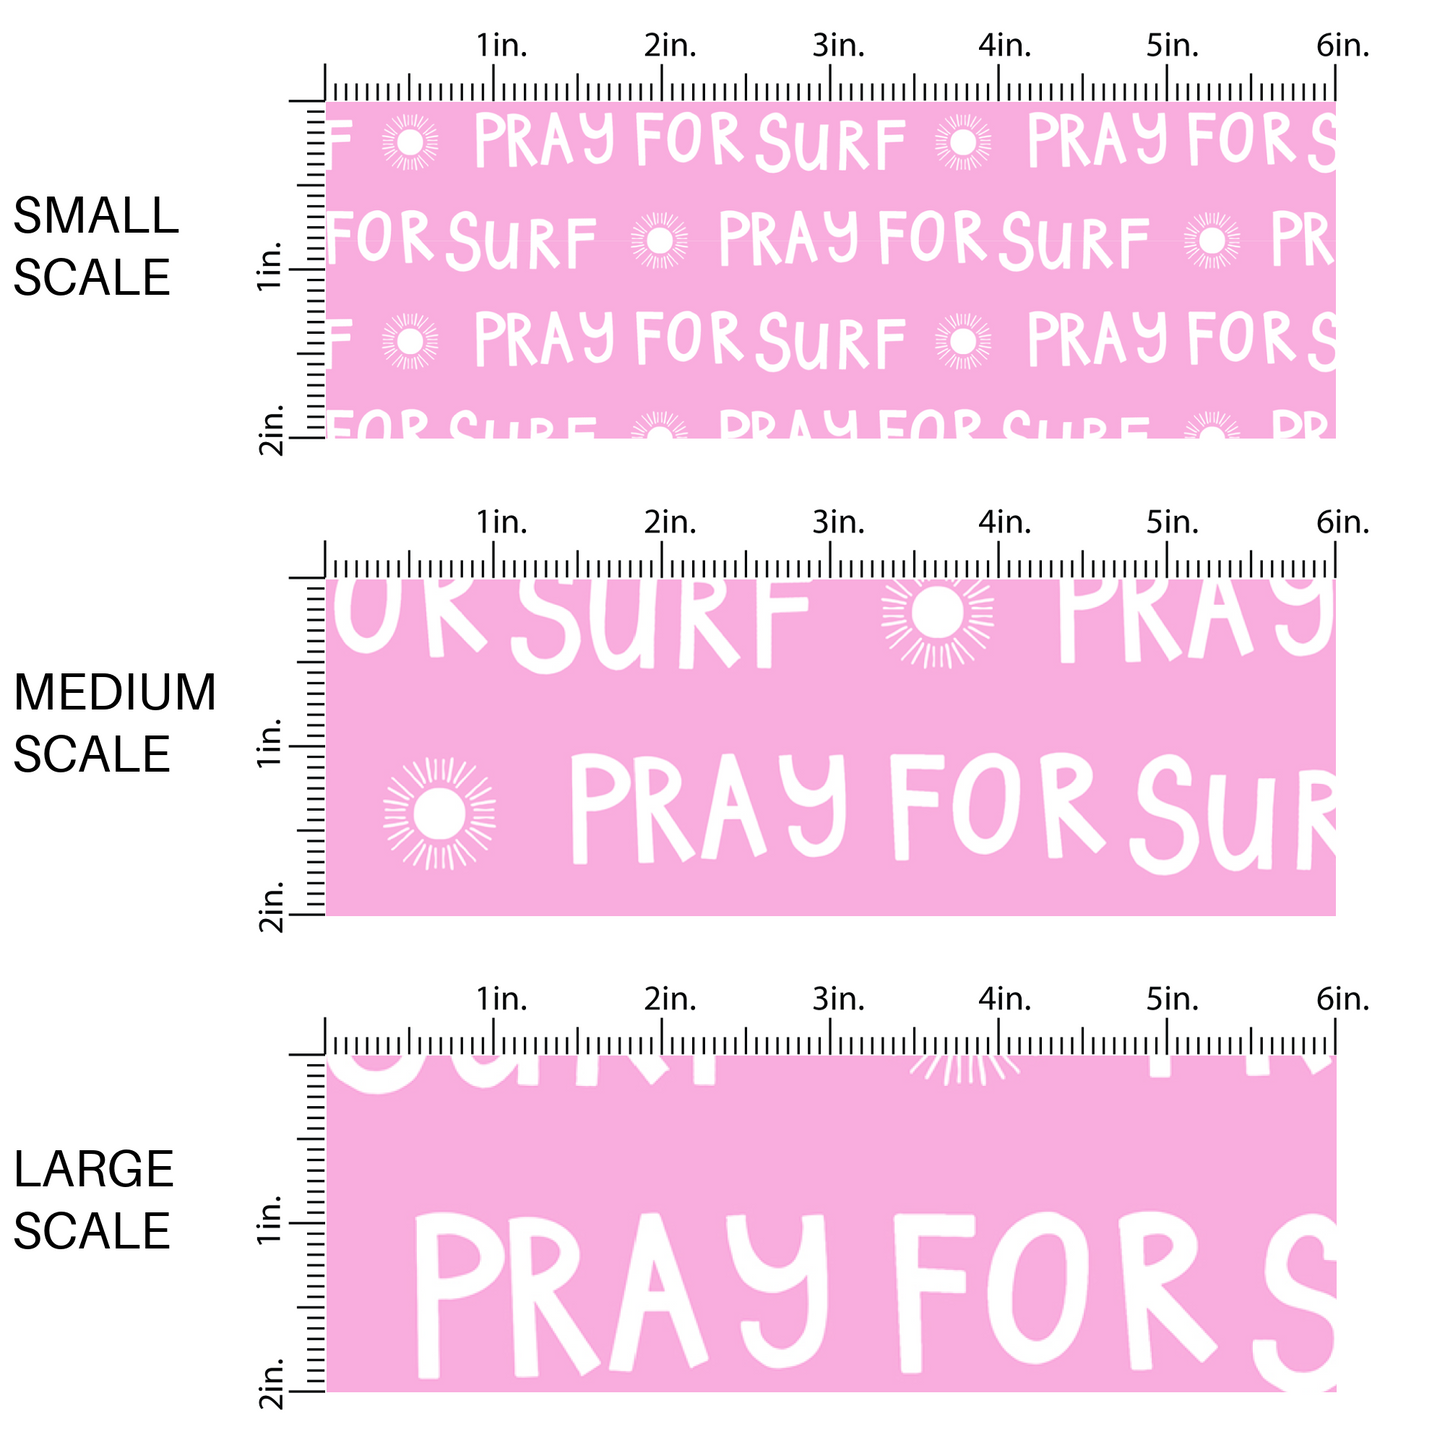 Pink fabric by the yard scaled image guide with suns and the phrase "Pray For Surf"